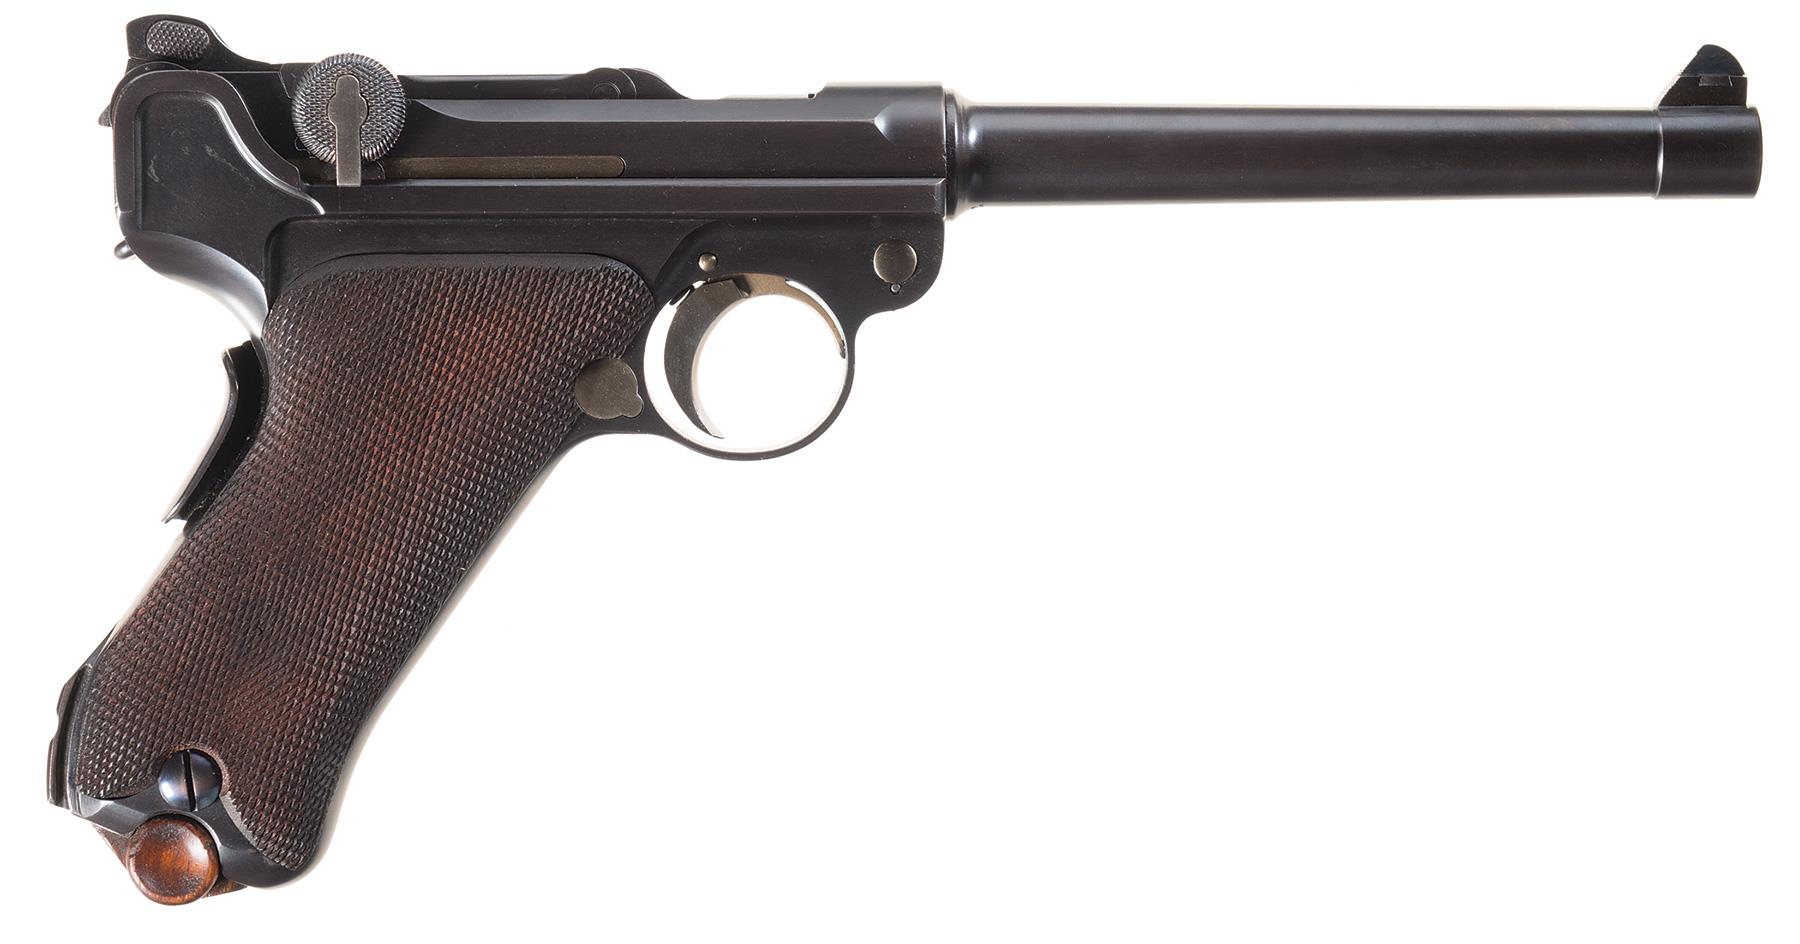 This DWM P04 pistol is a re-built reproduction by one of the world's foremost Luger restorers Gale C. Morgan. Note the catch on the rear sight to release it so it can be set to either 100meters or 200meters.